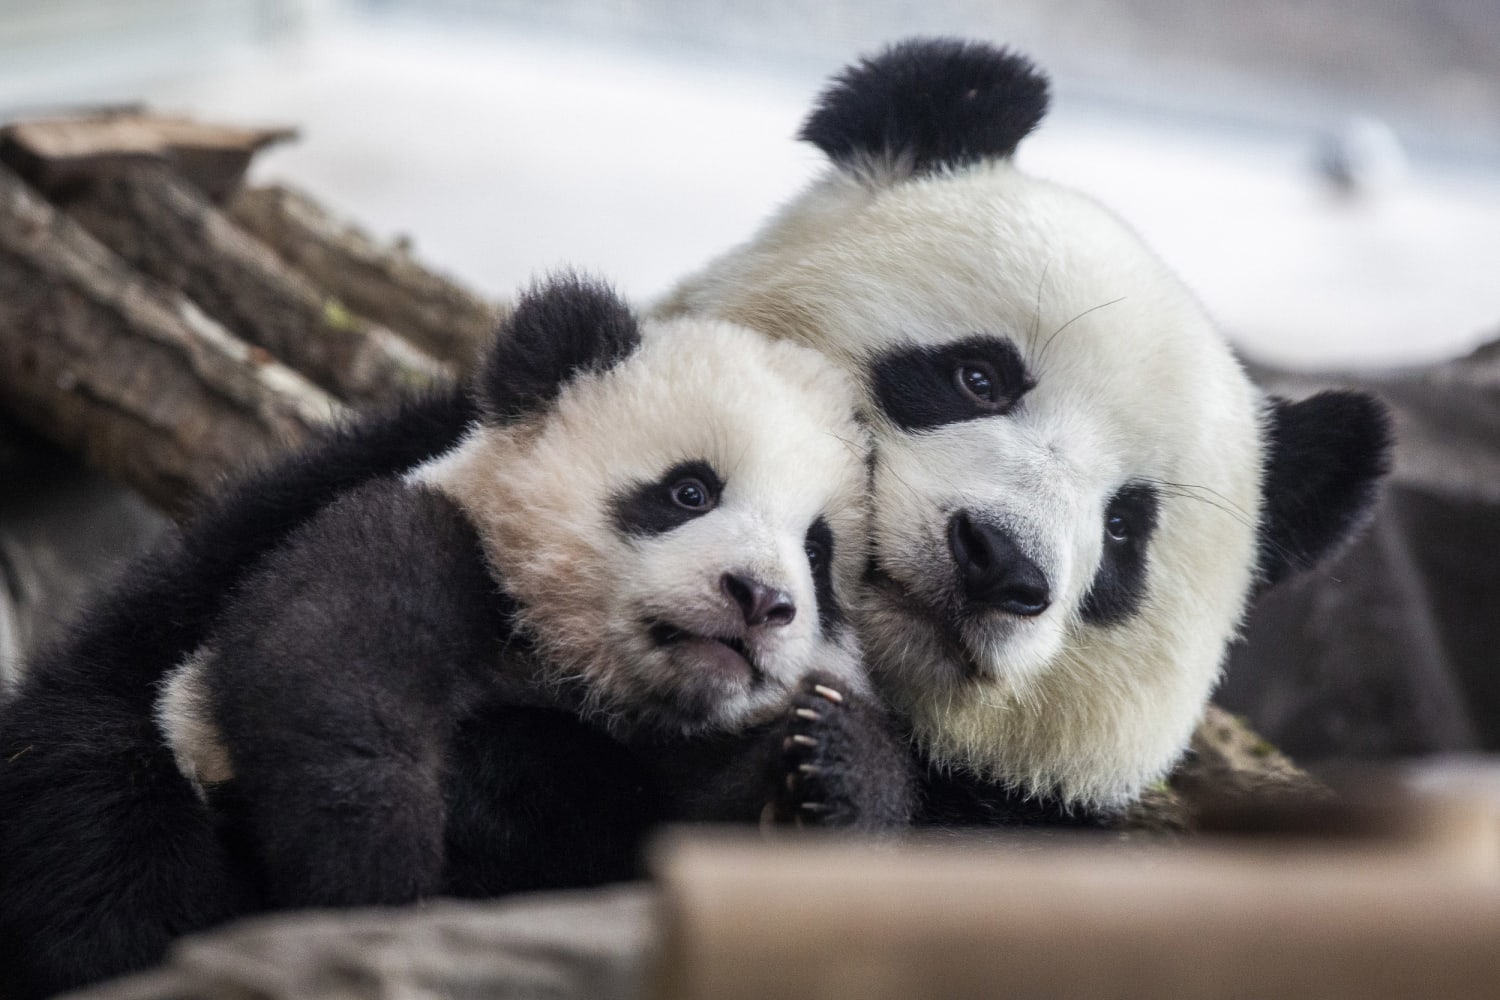 Giant pandas no longer classed as endangered after population growth, China  says